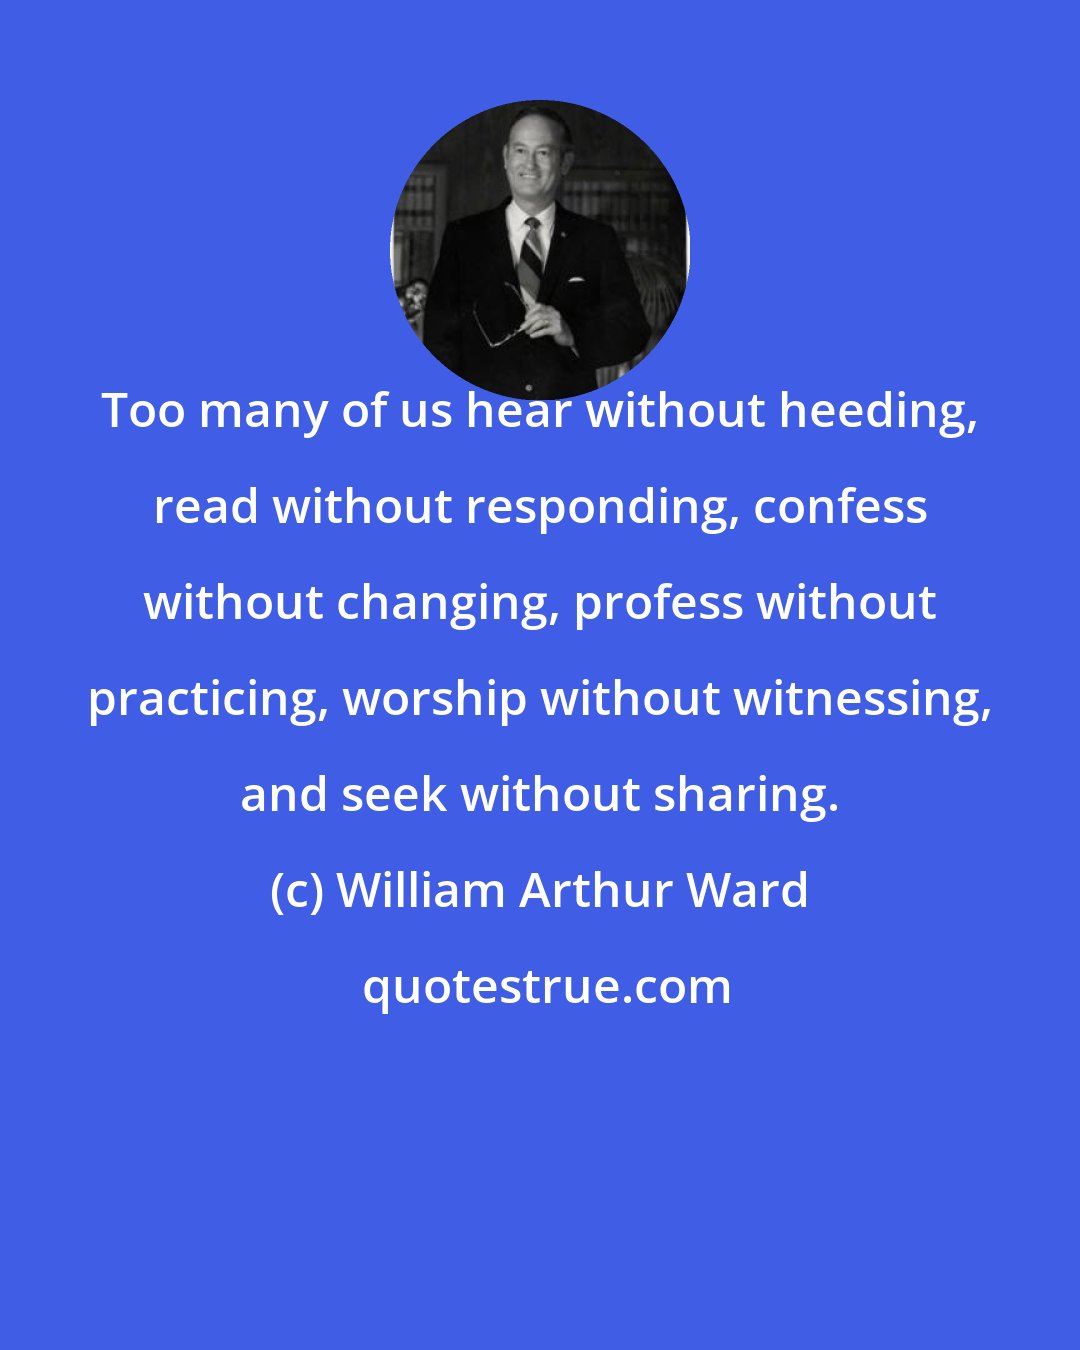 William Arthur Ward: Too many of us hear without heeding, read without responding, confess without changing, profess without practicing, worship without witnessing, and seek without sharing.